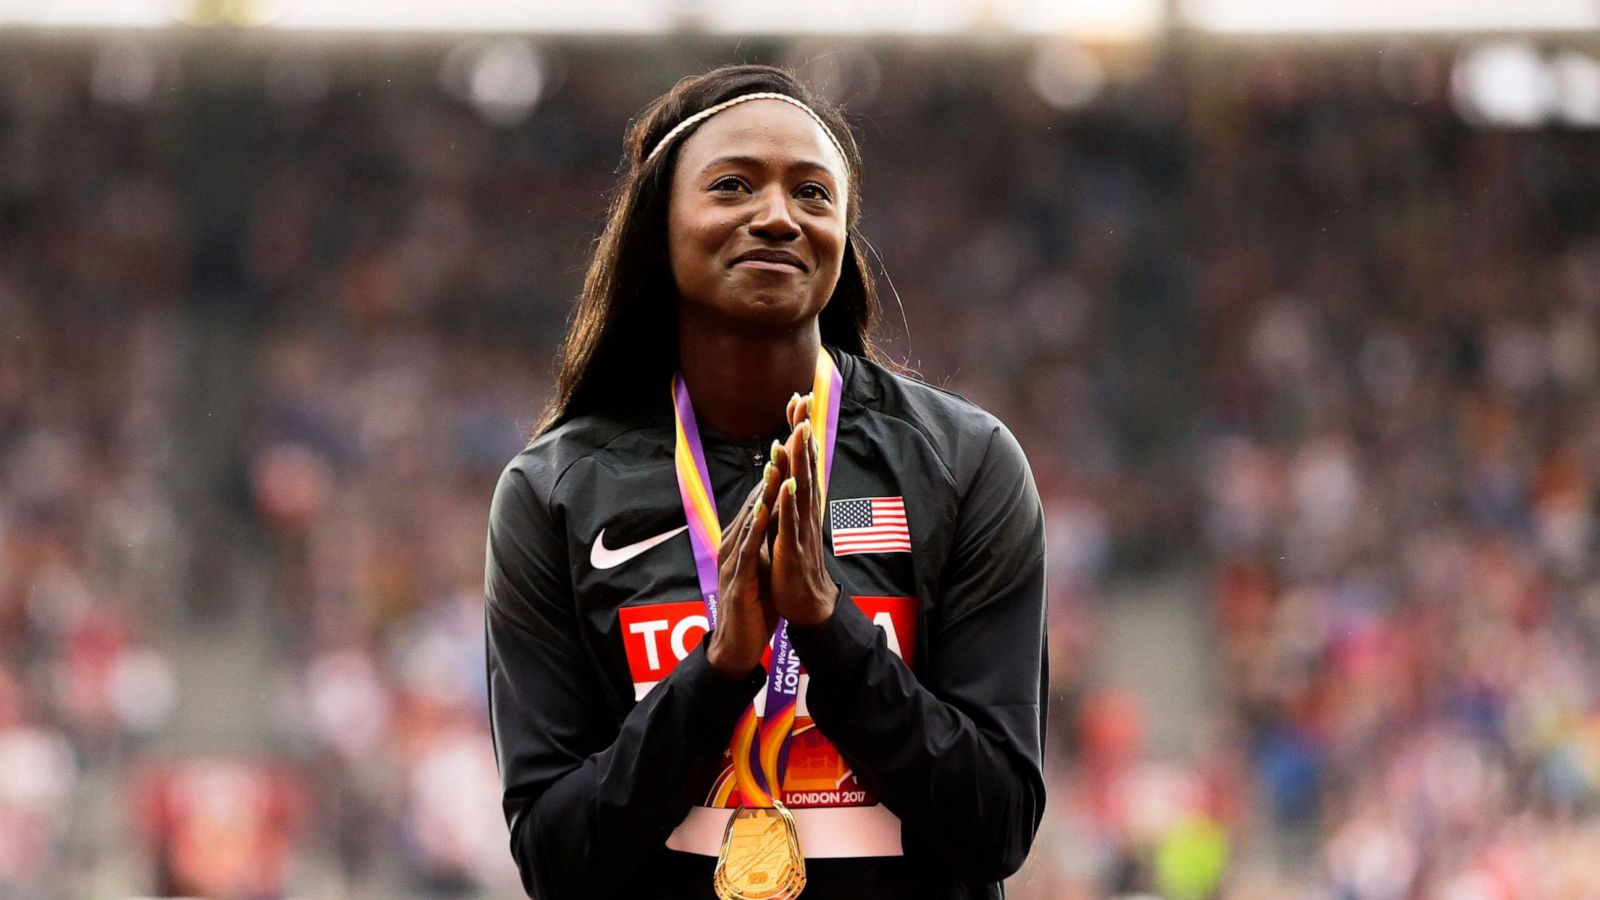 US Olympian dies from pregnancy complication that disproportionately impacts Black women